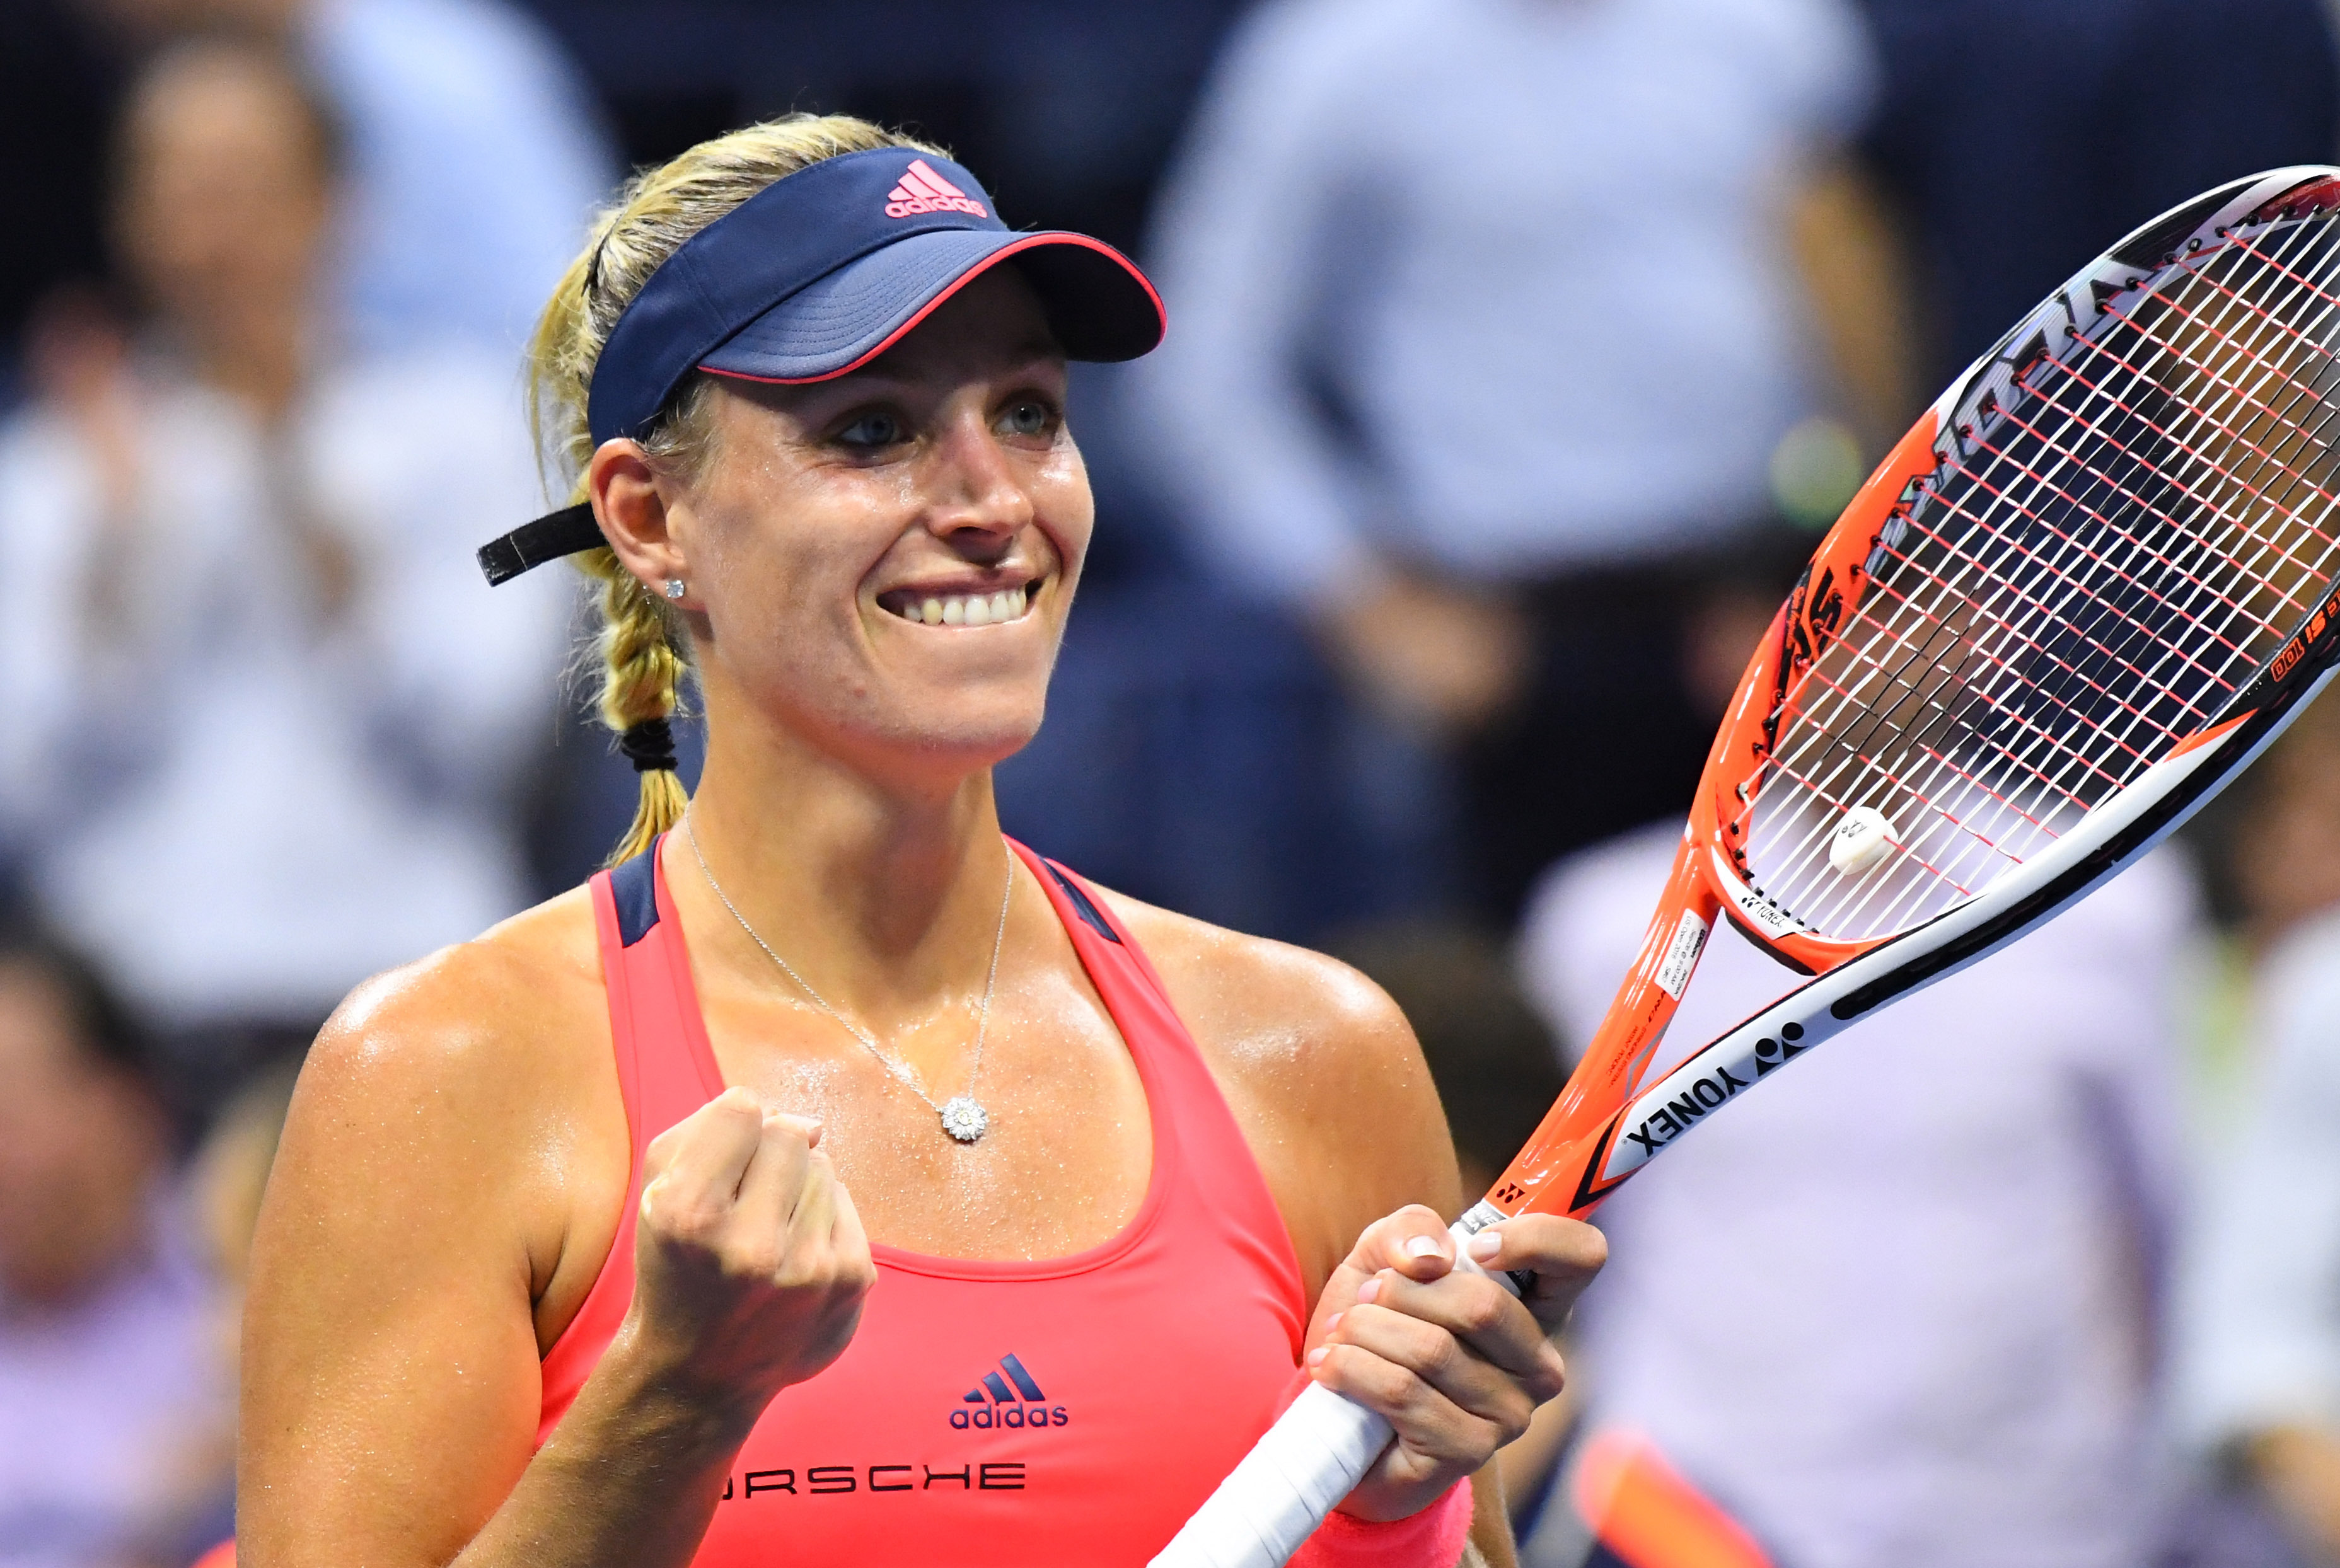 US Open Tennis 2016 Women's Final TV Schedule, Start Time and Live